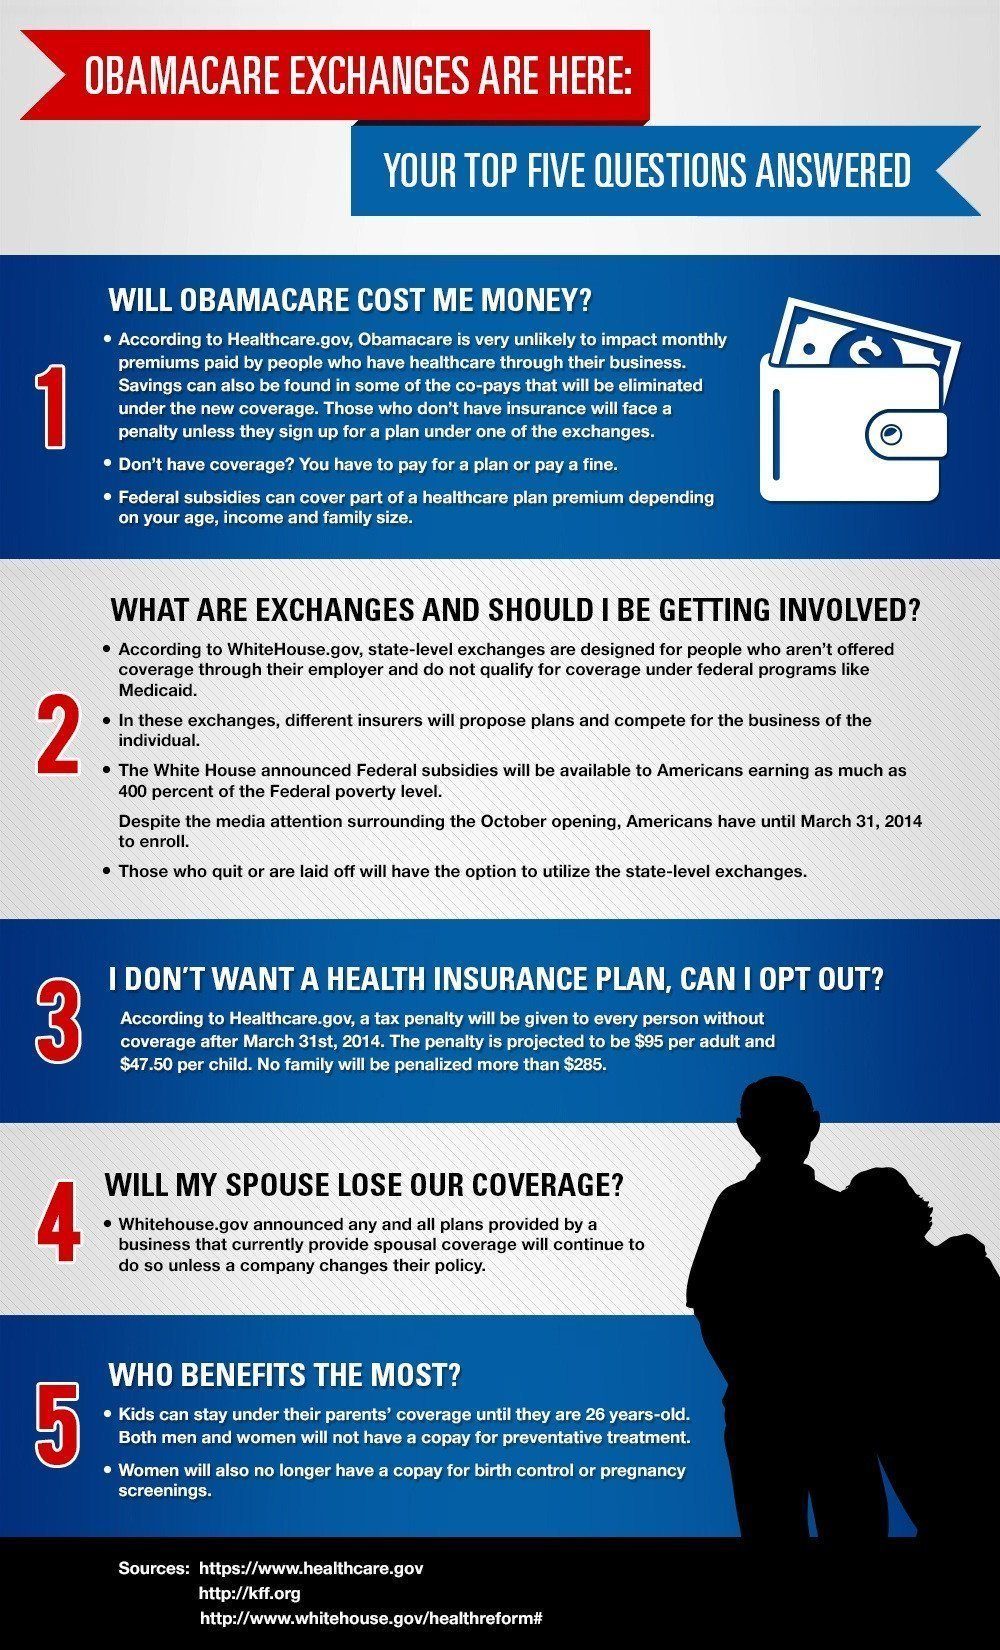 ObamaCare Exchanges: The Information You Need to Know